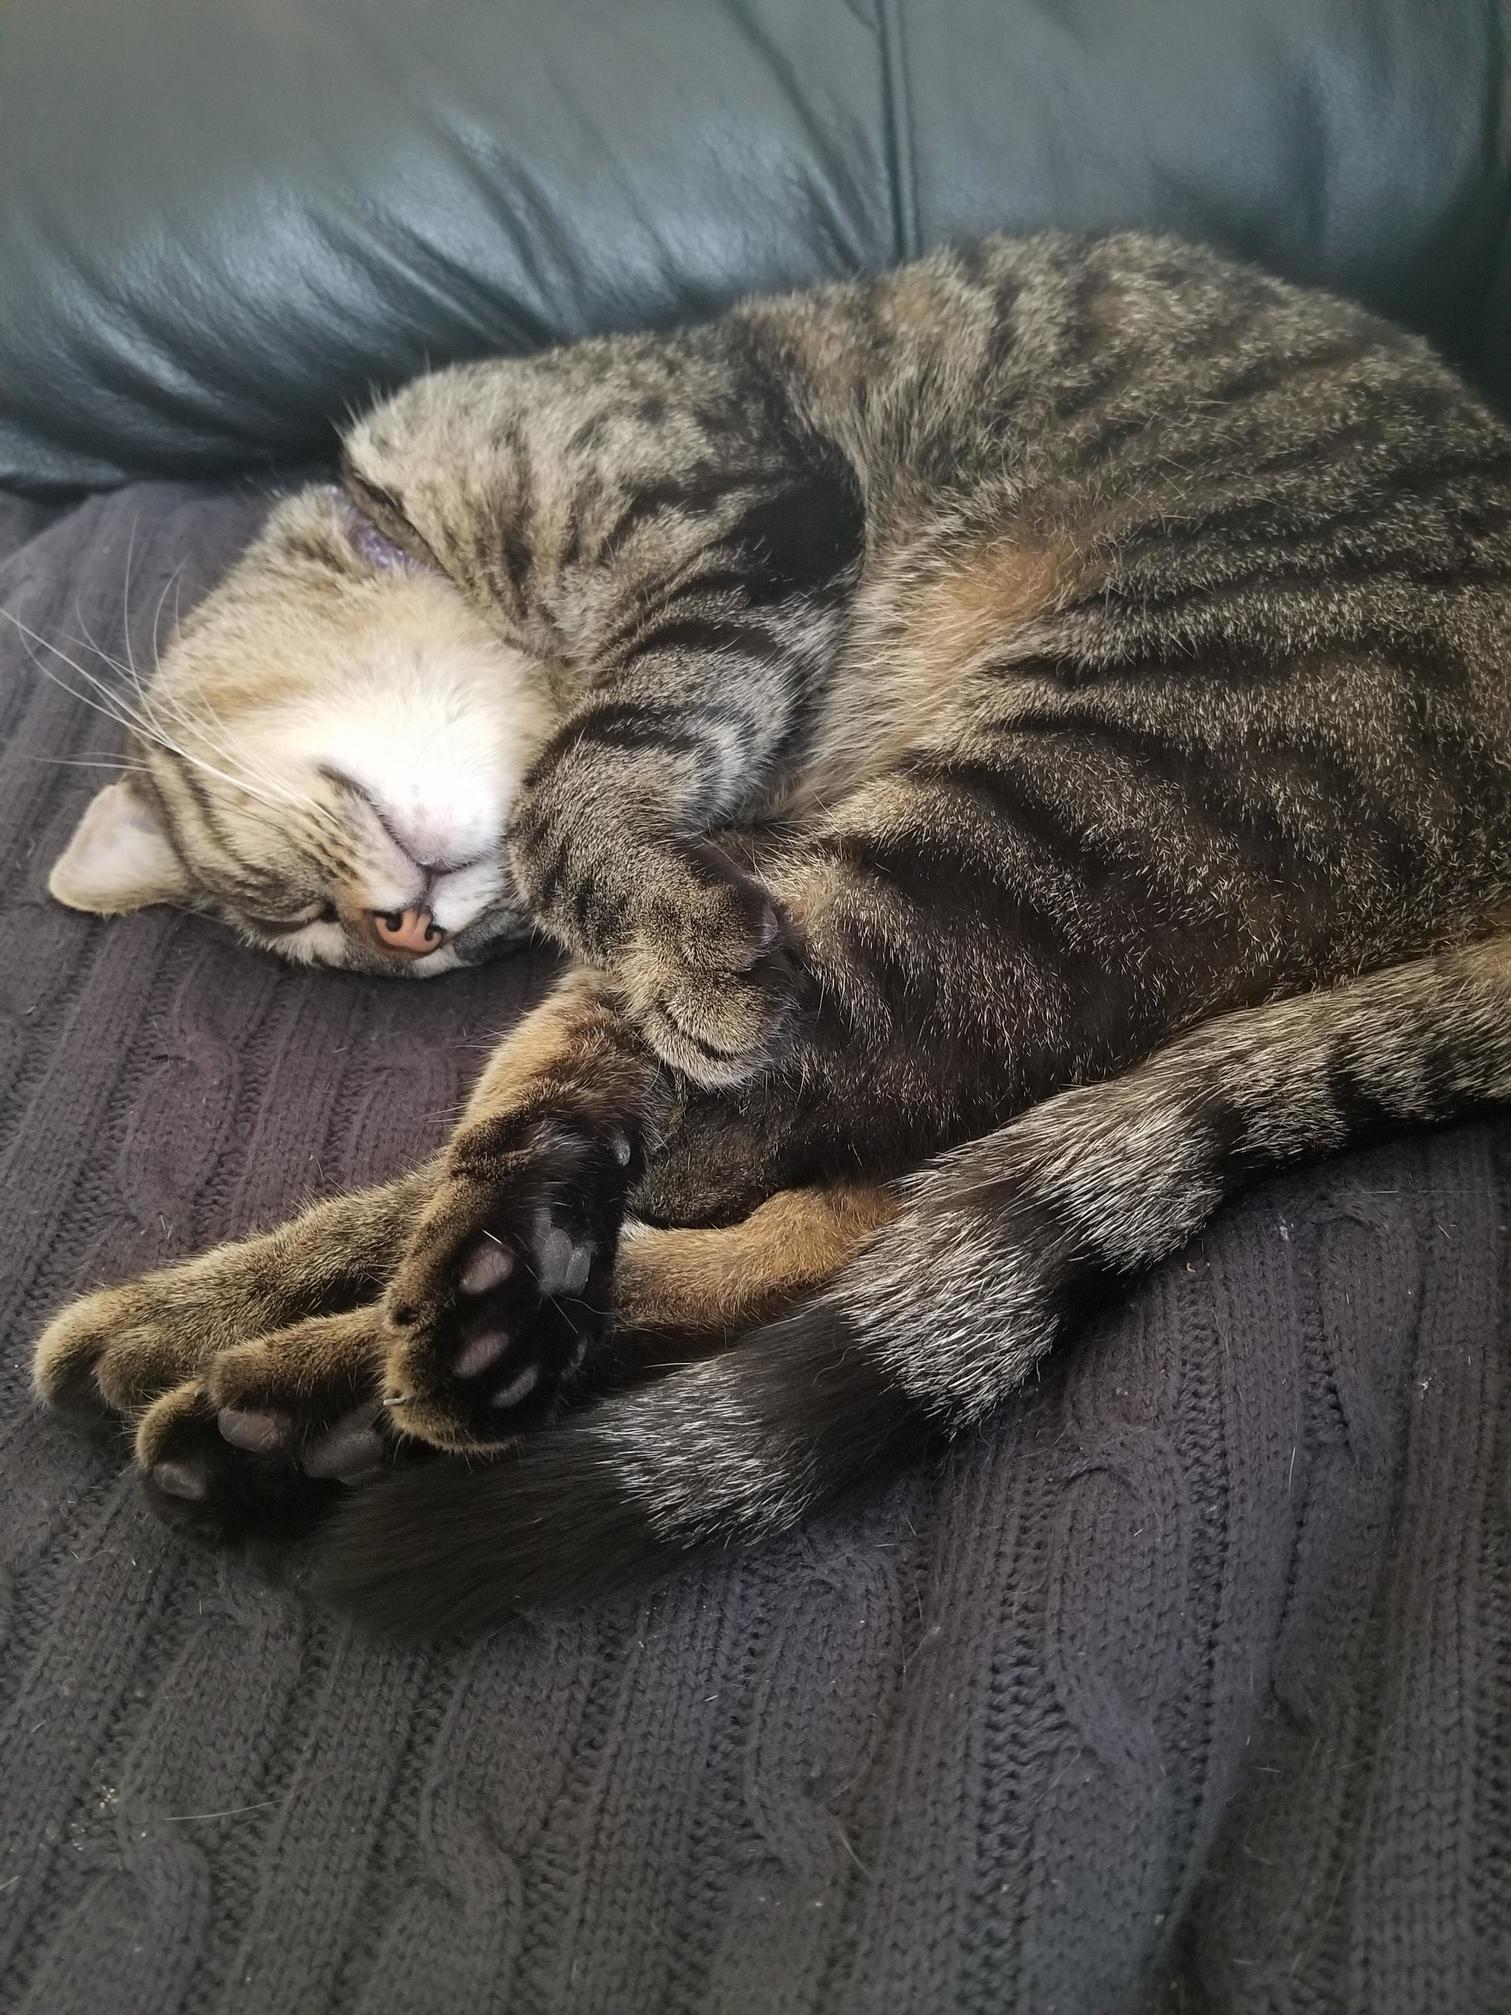 My cats favorite position to sleep.